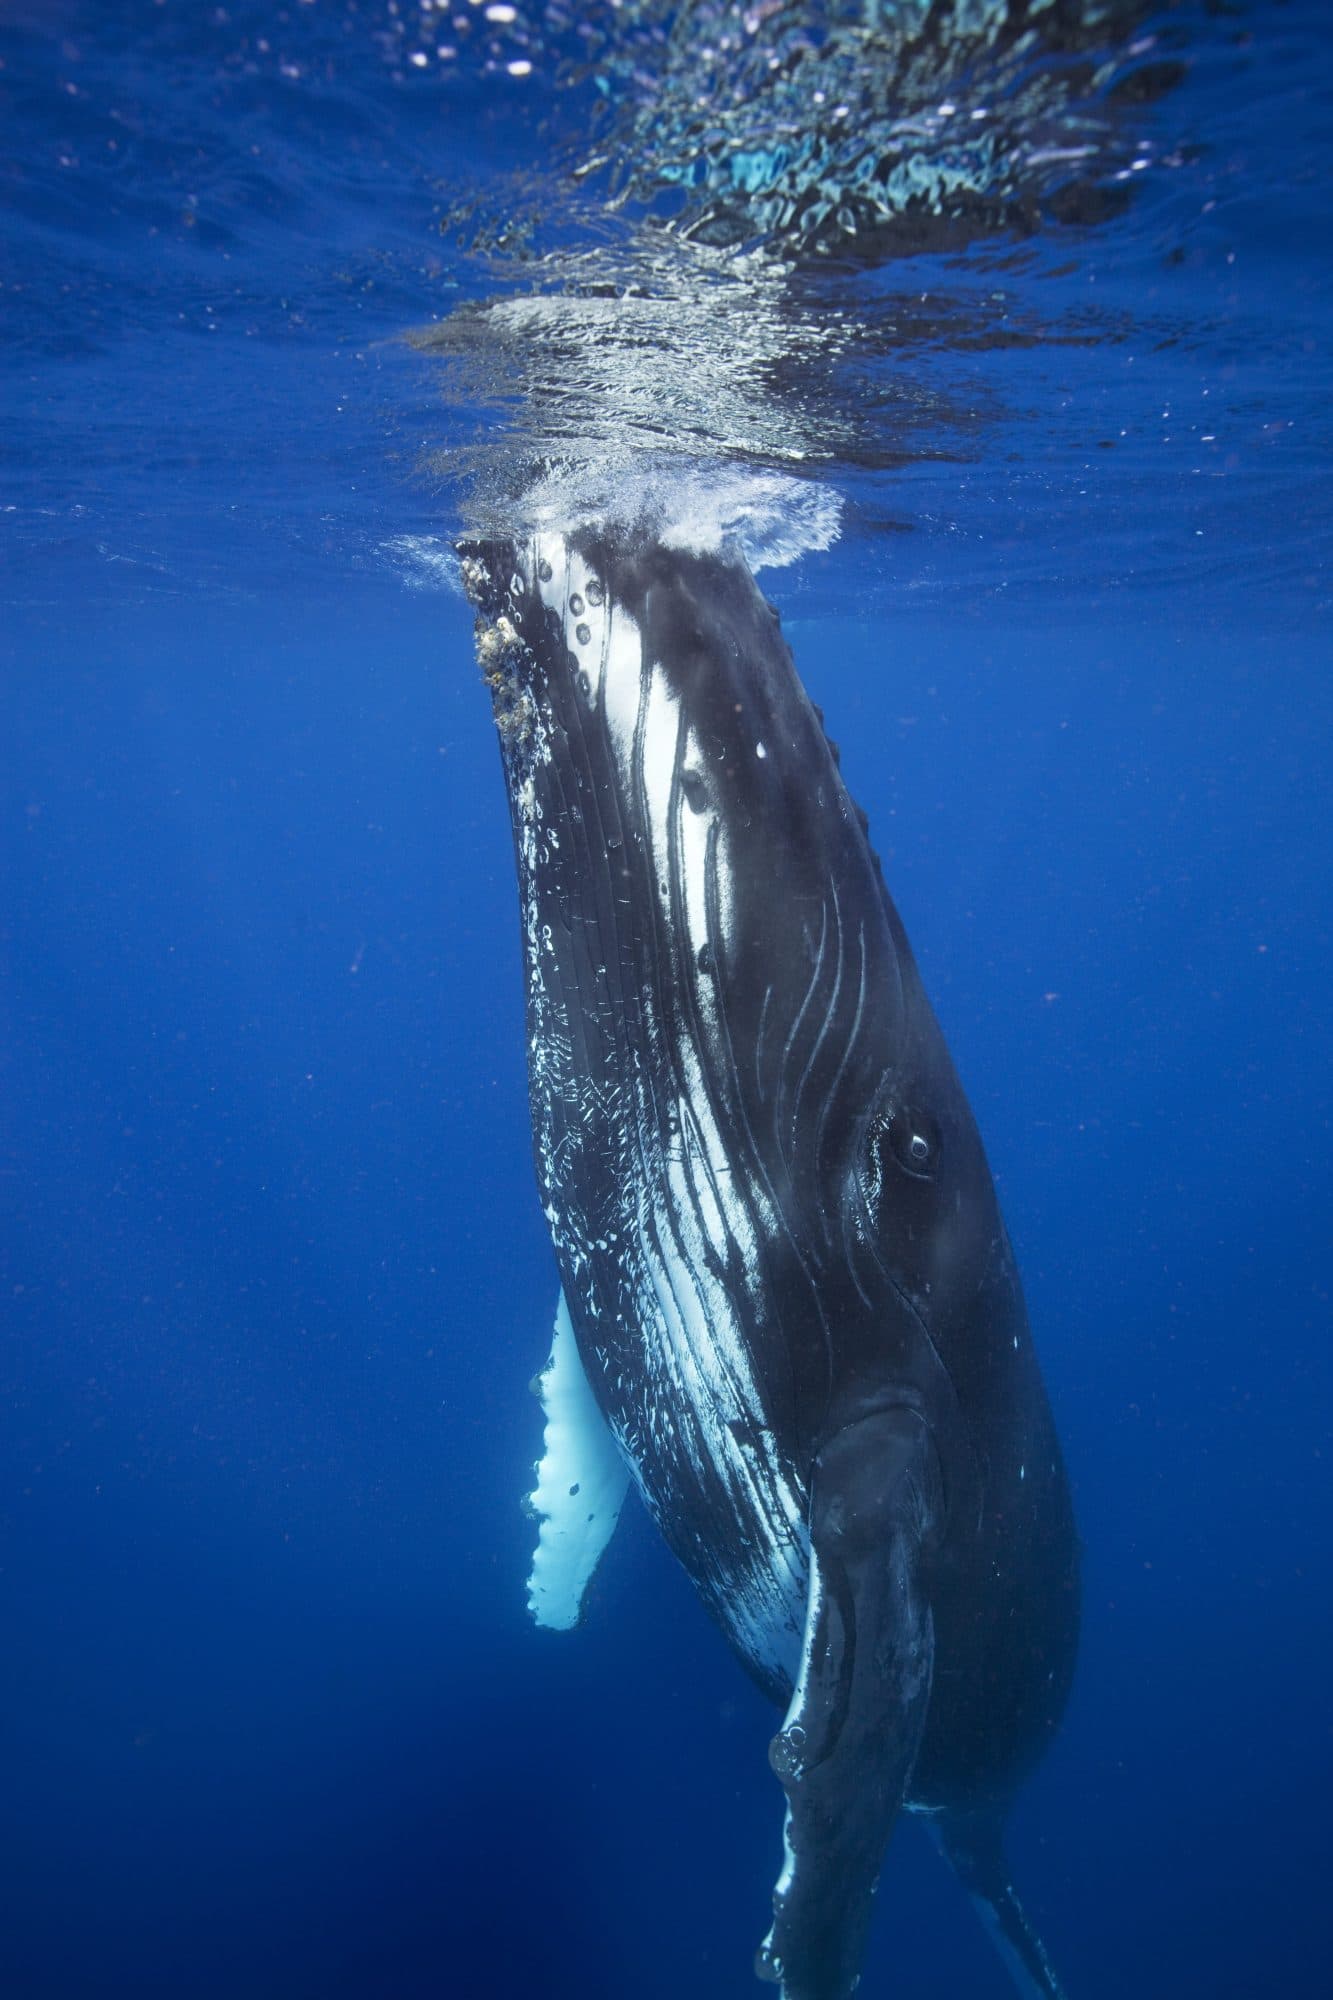 A humpback whale under water